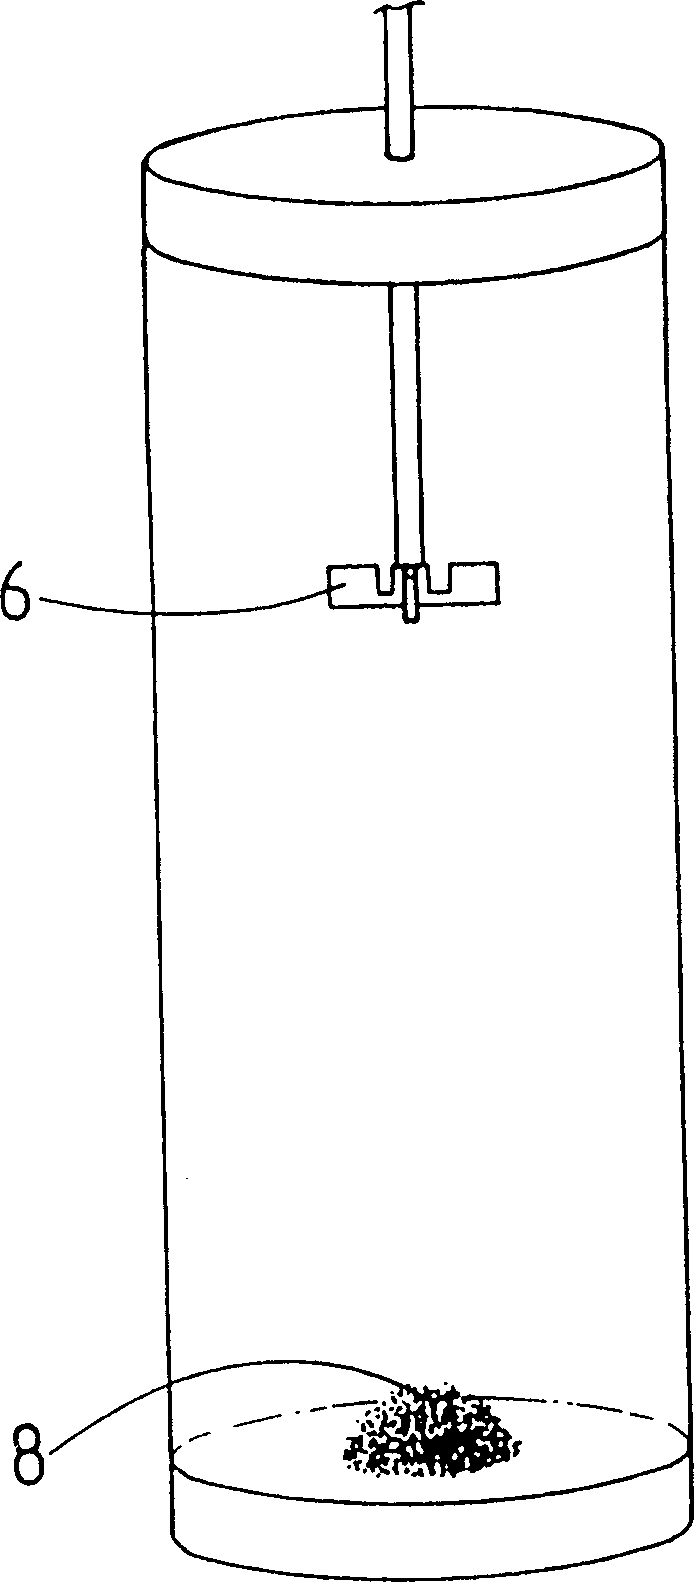 Method and apparatus for mixing